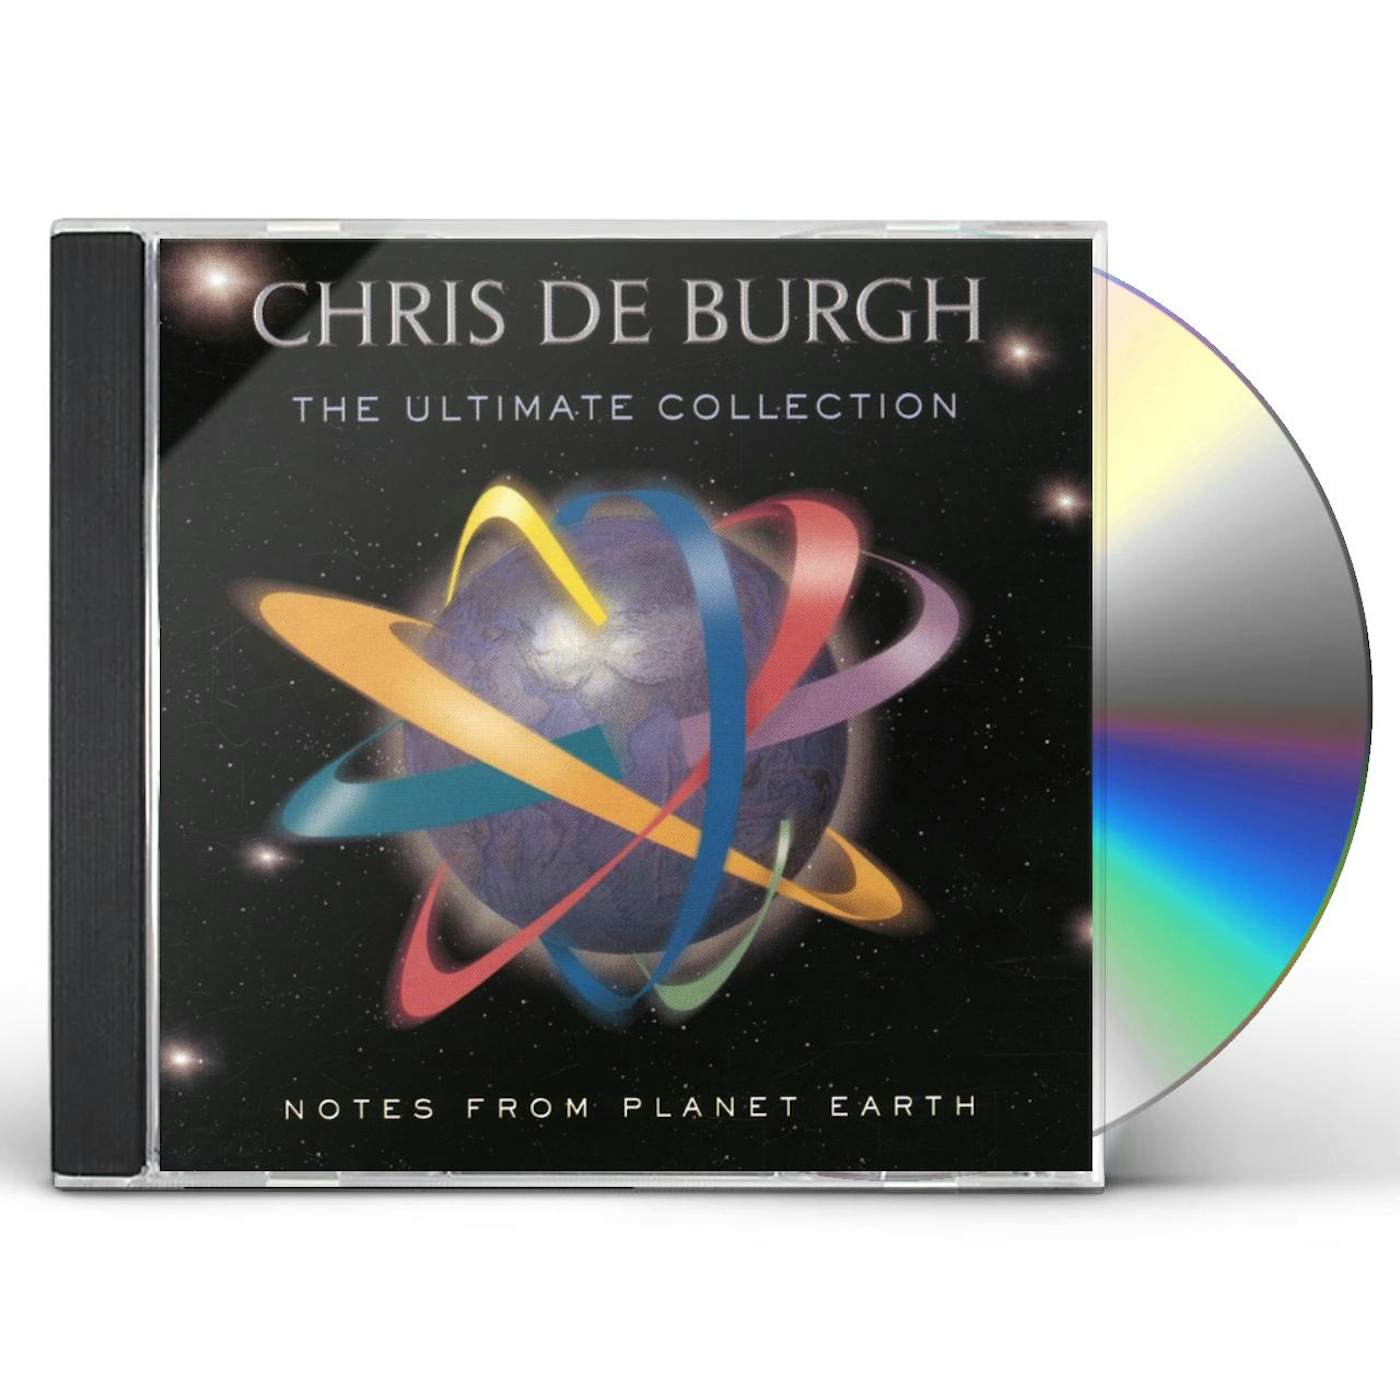 Chris de Burgh NOTES FROM PLANET EARTH: ULTIMATE COLLECTION CD